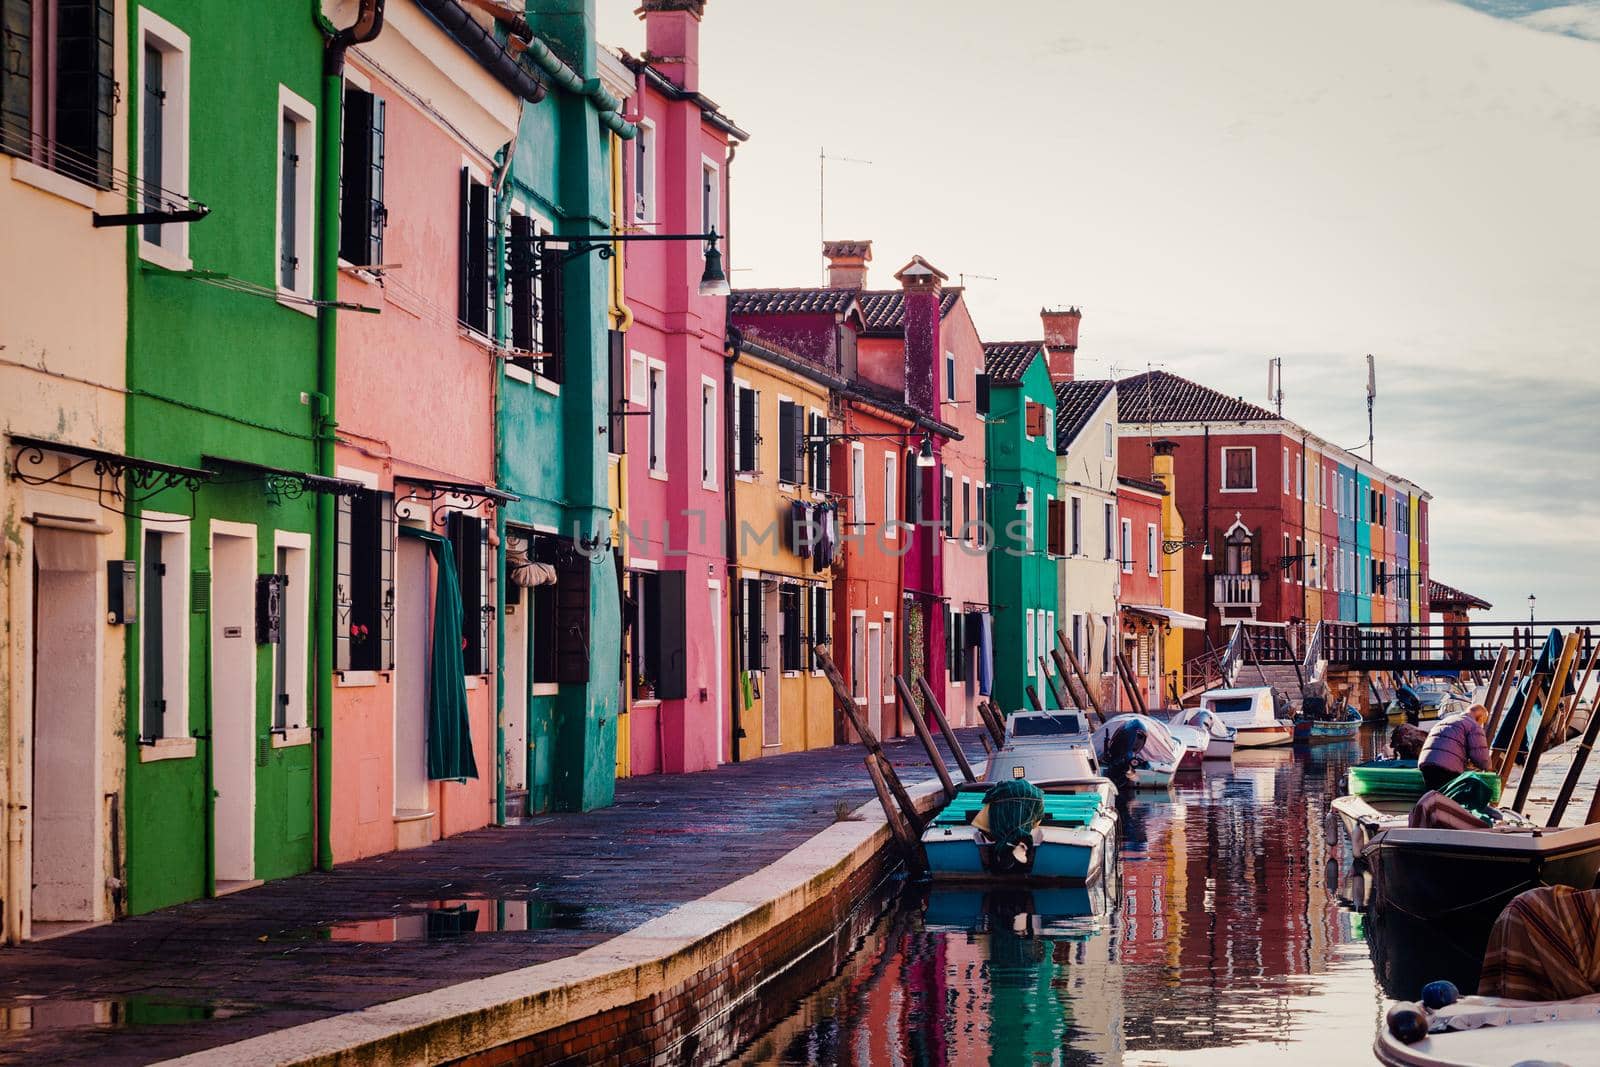 Burano, Italy - January, 06: View of the Colorful houses of Burano island on January 06, 2022